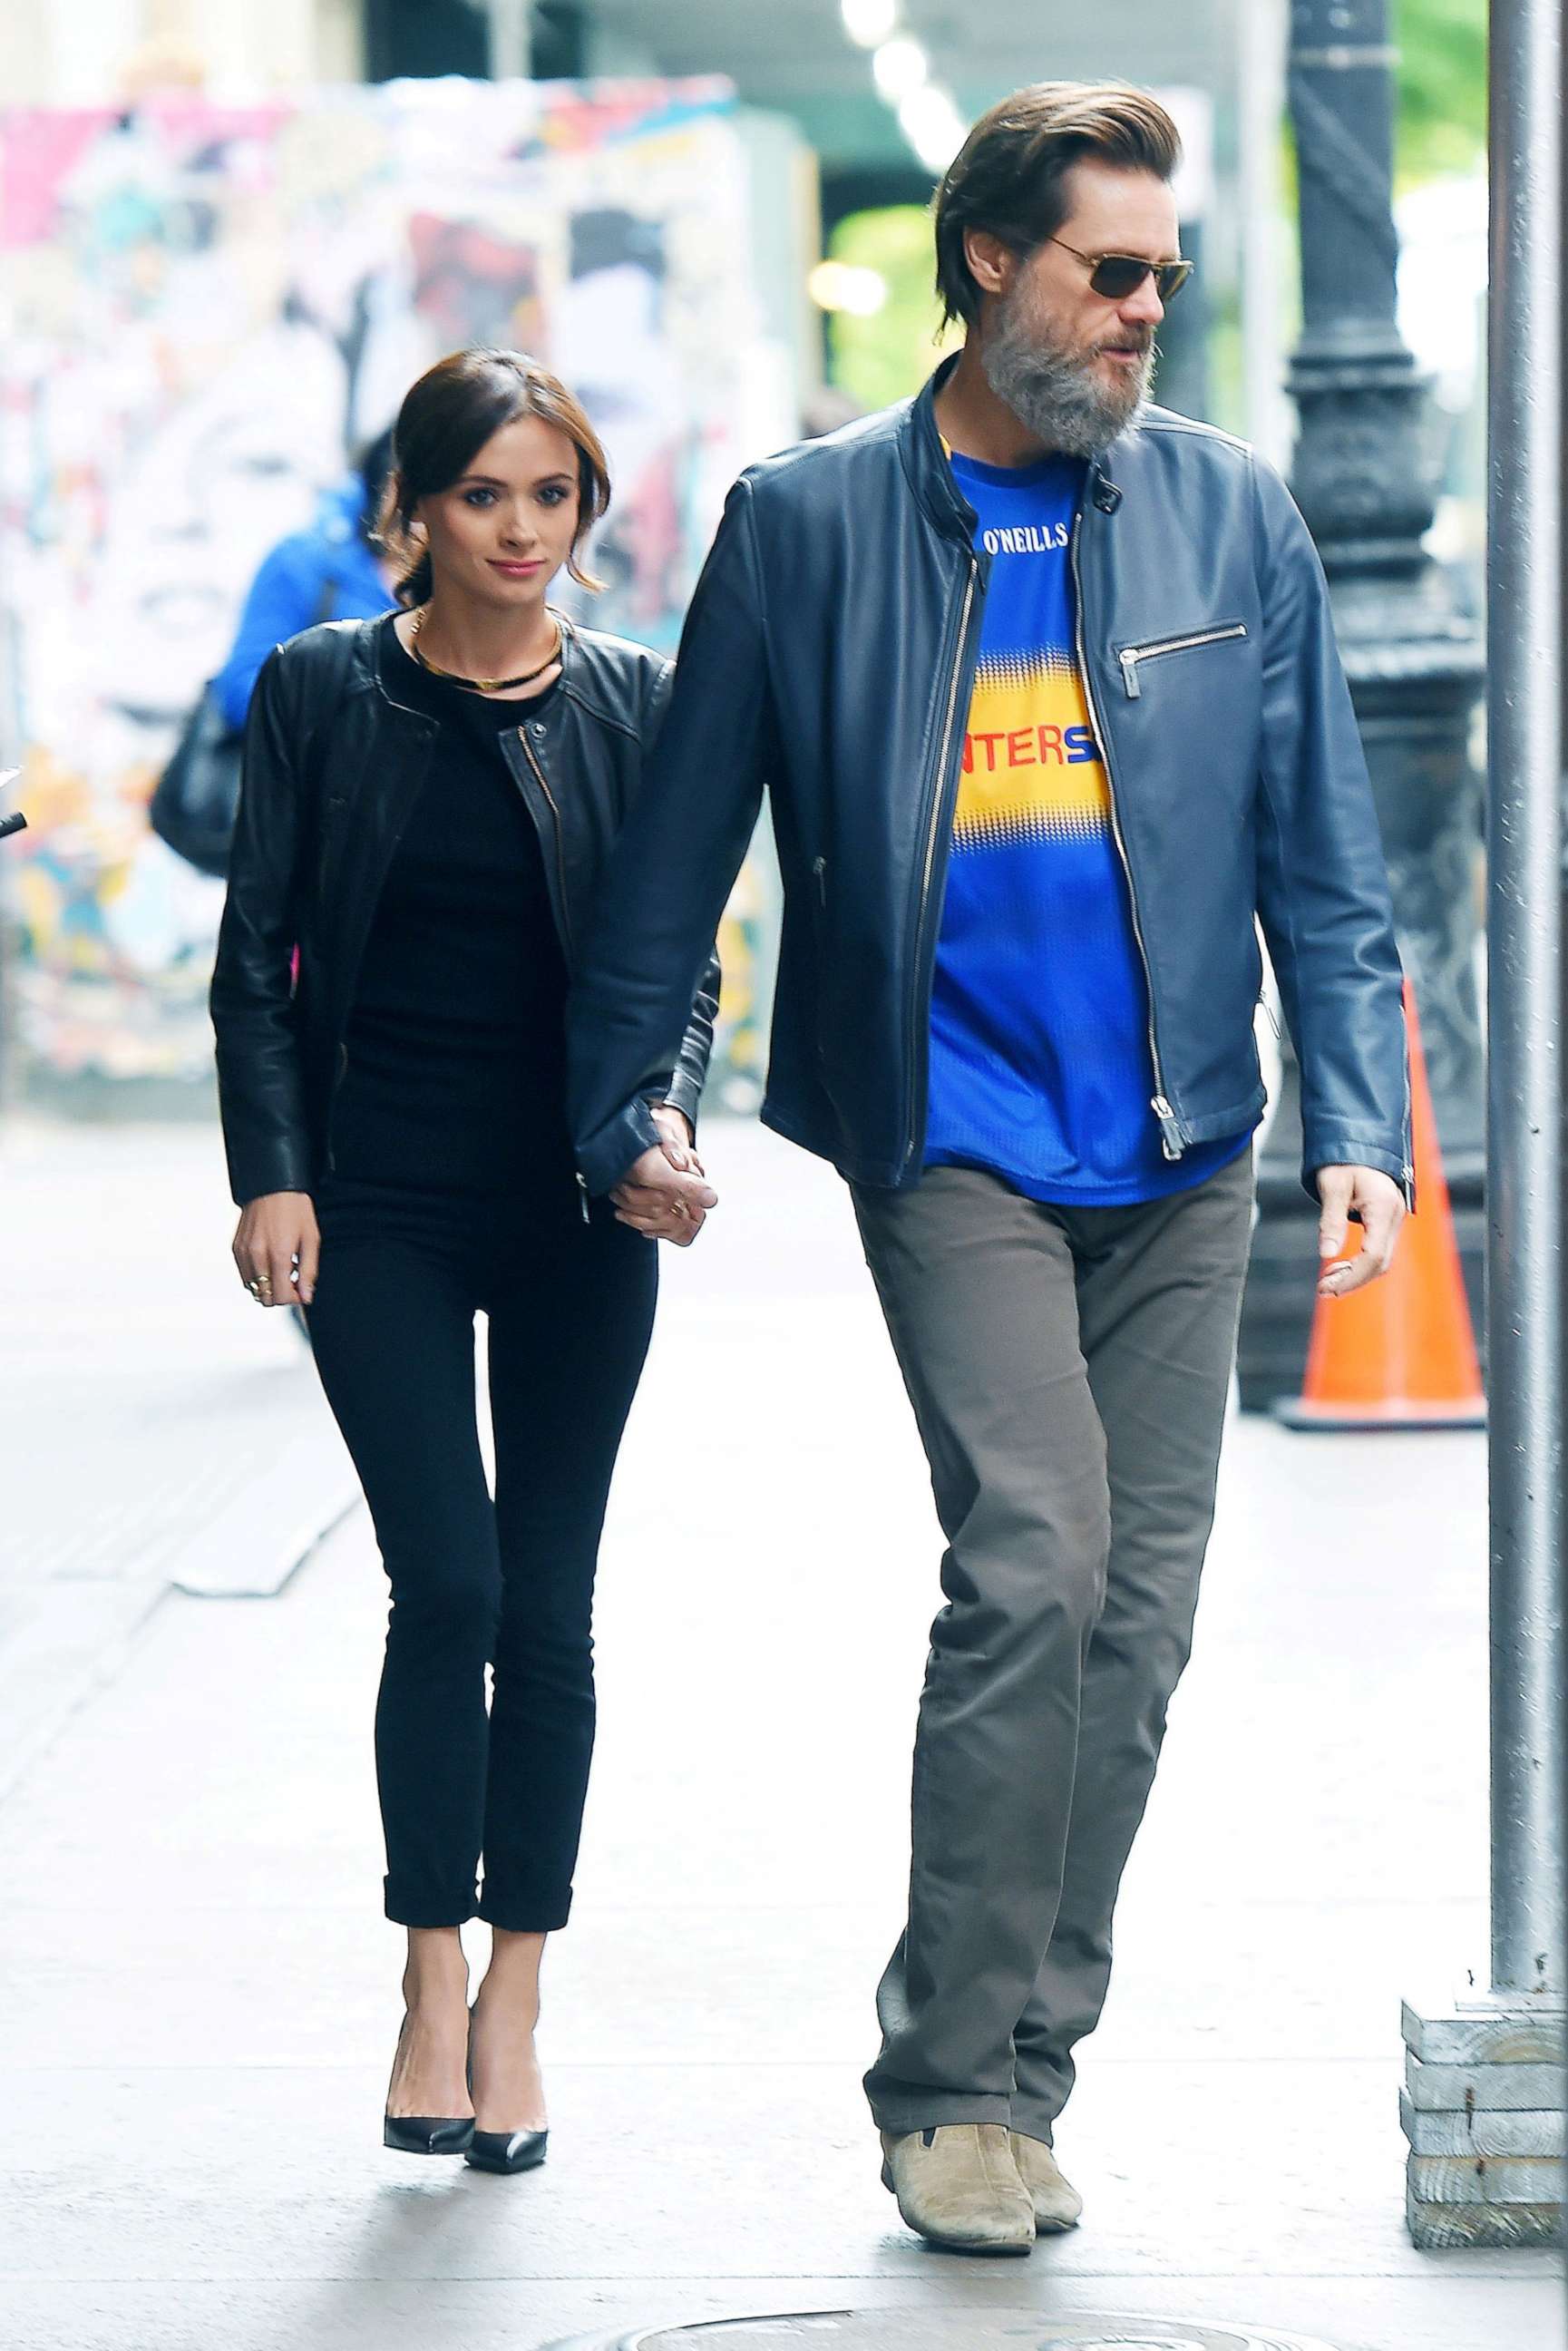 PHOTO: Cathriona White and Jim Carrey walk in New York City on MAY 21, 2015.